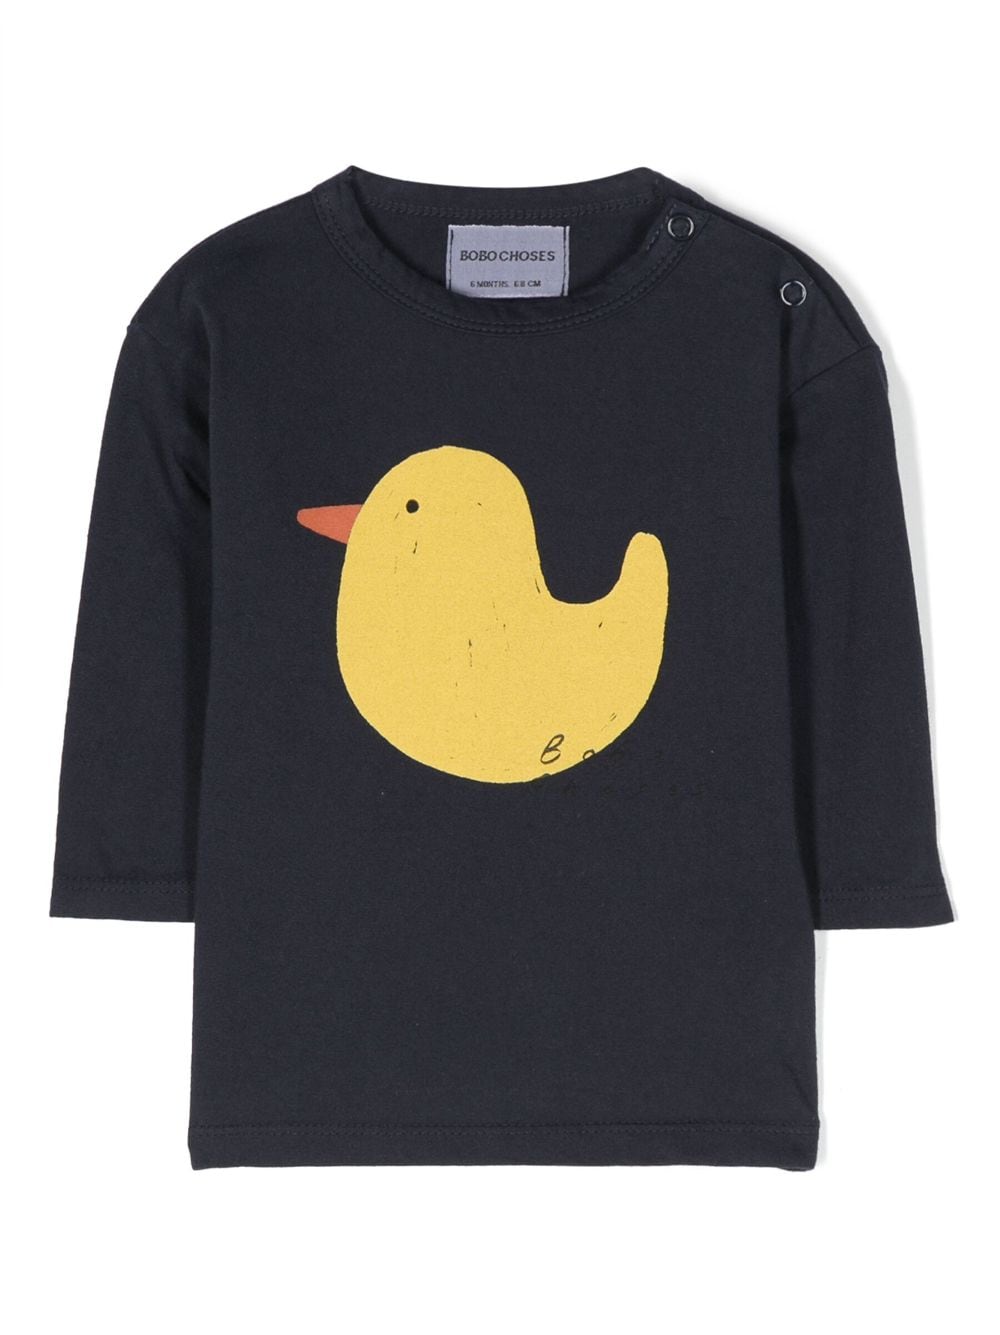 Bobo Choses Baby Rubber Duck Long Sleeve T